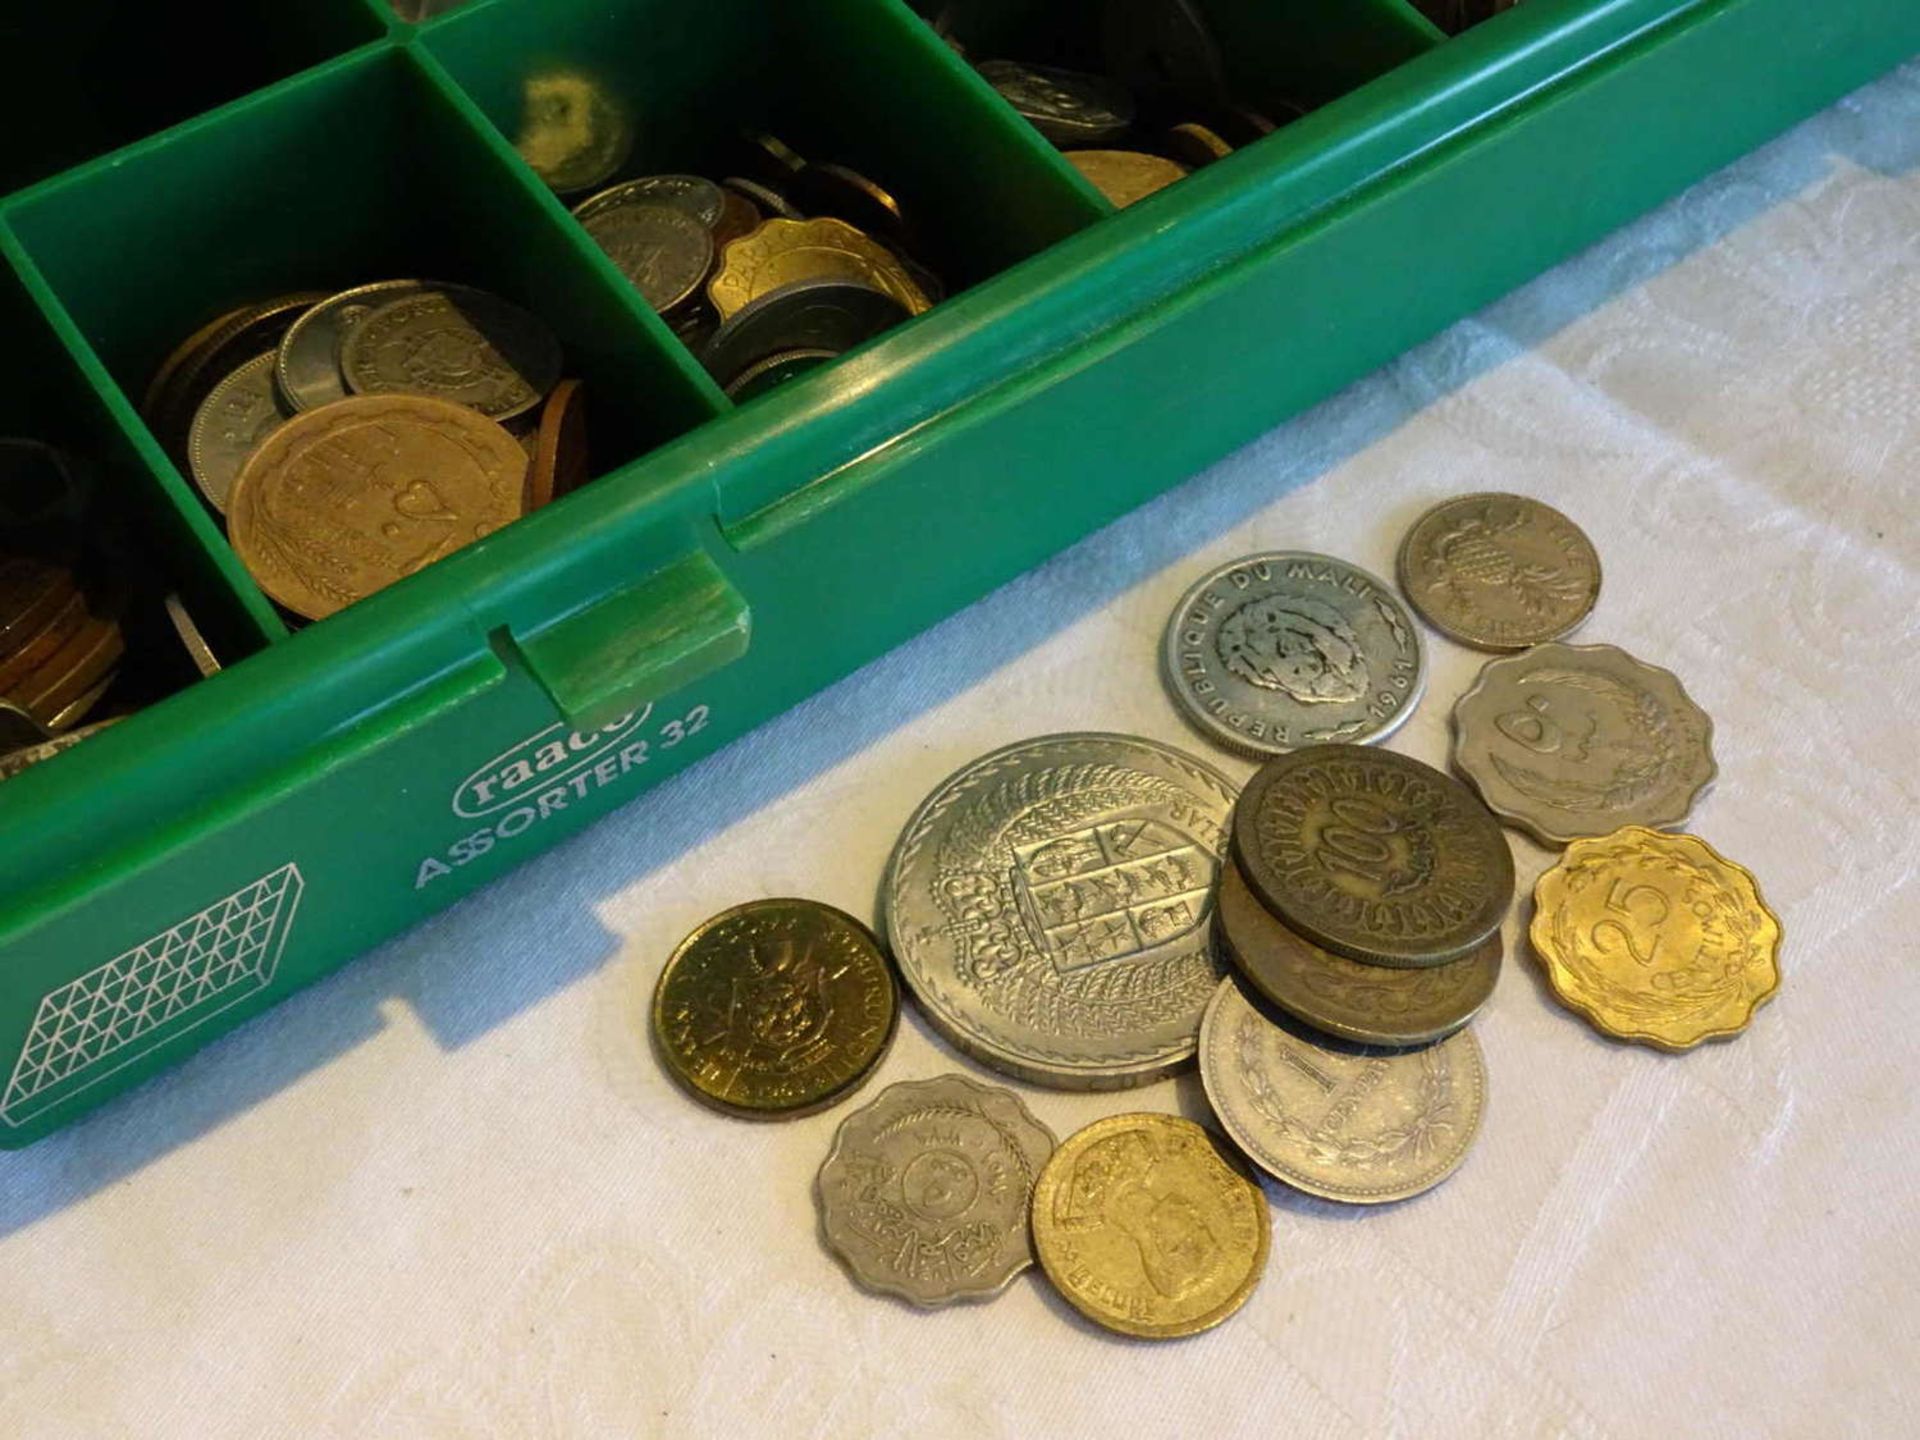 Lot of coins, all the world. Mostly African countries. Maybe treasure trove? Please visit!